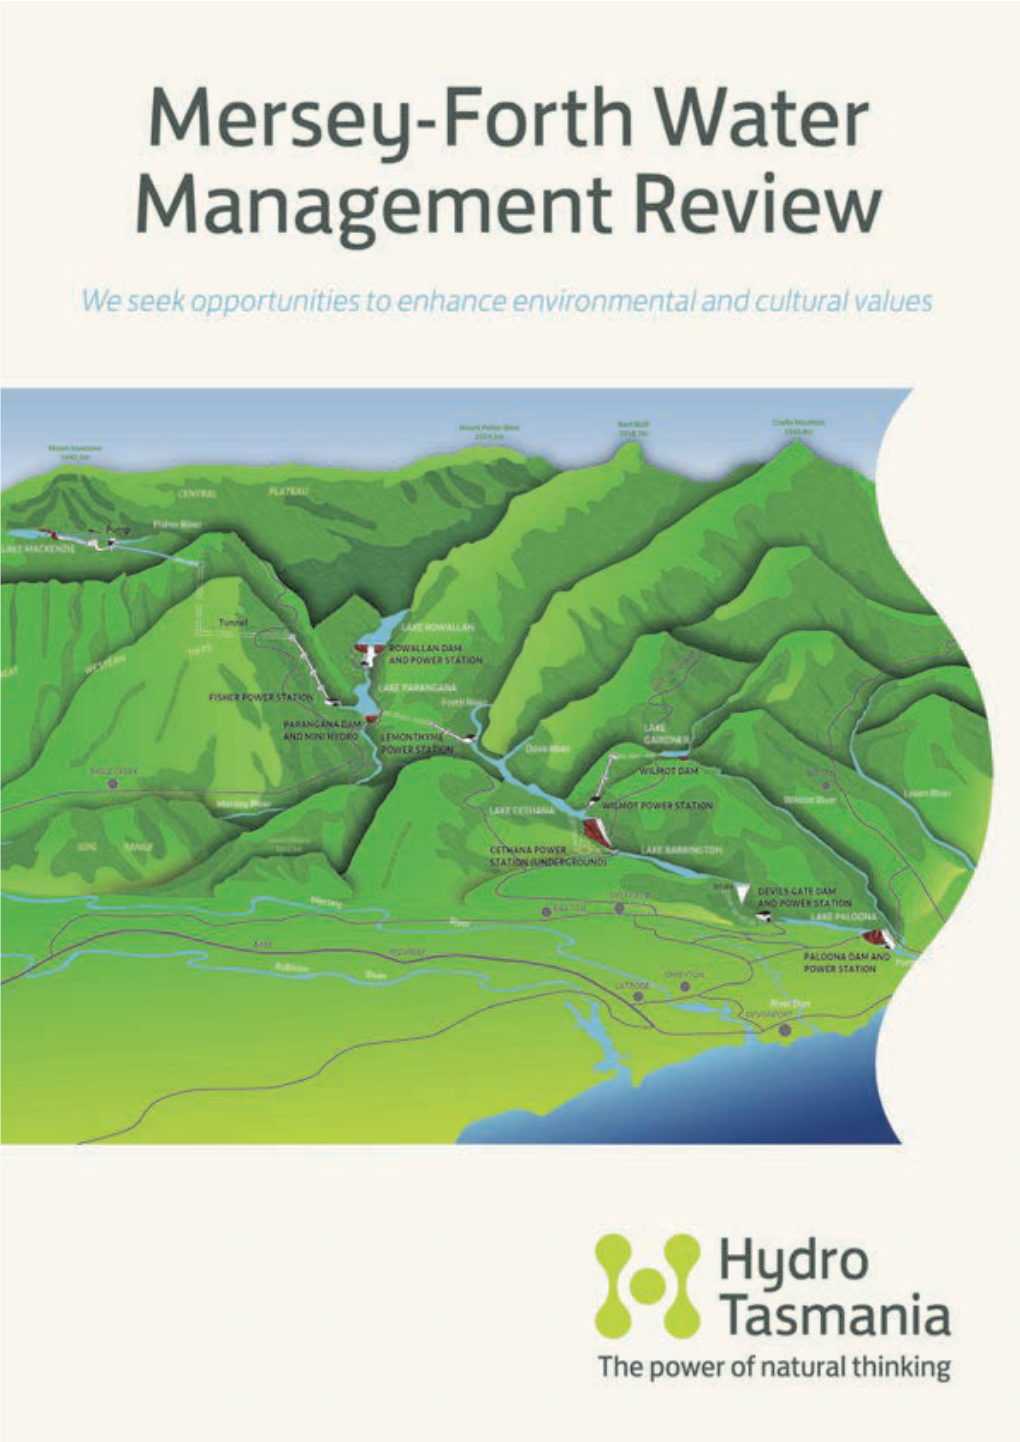 Mersey-Forth Water Management Review Report